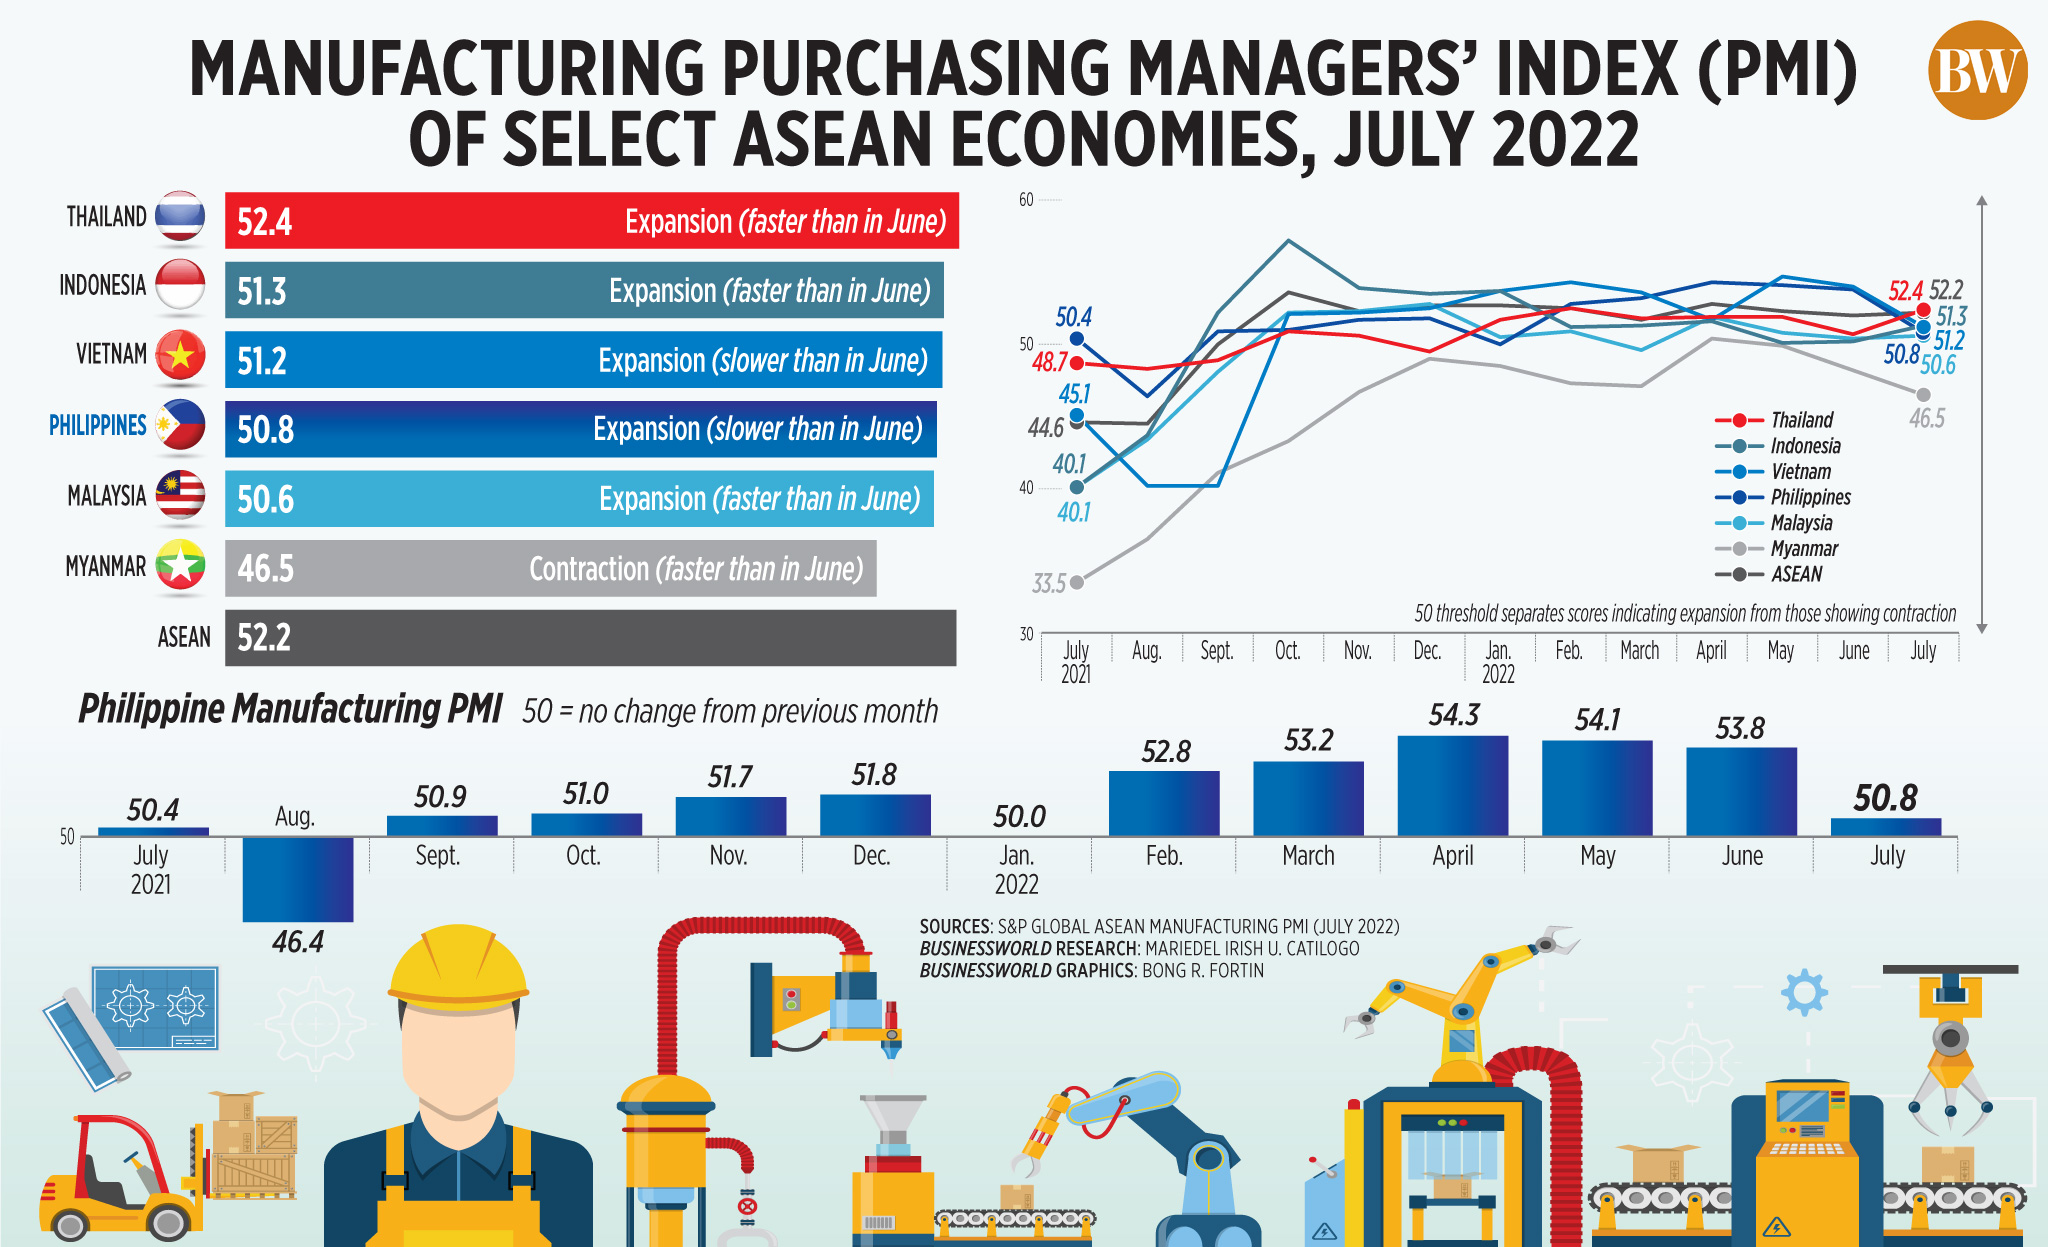 Manufacturing Purchasing Managers' Index (PMI) of selected ASEAN economies, July 2022